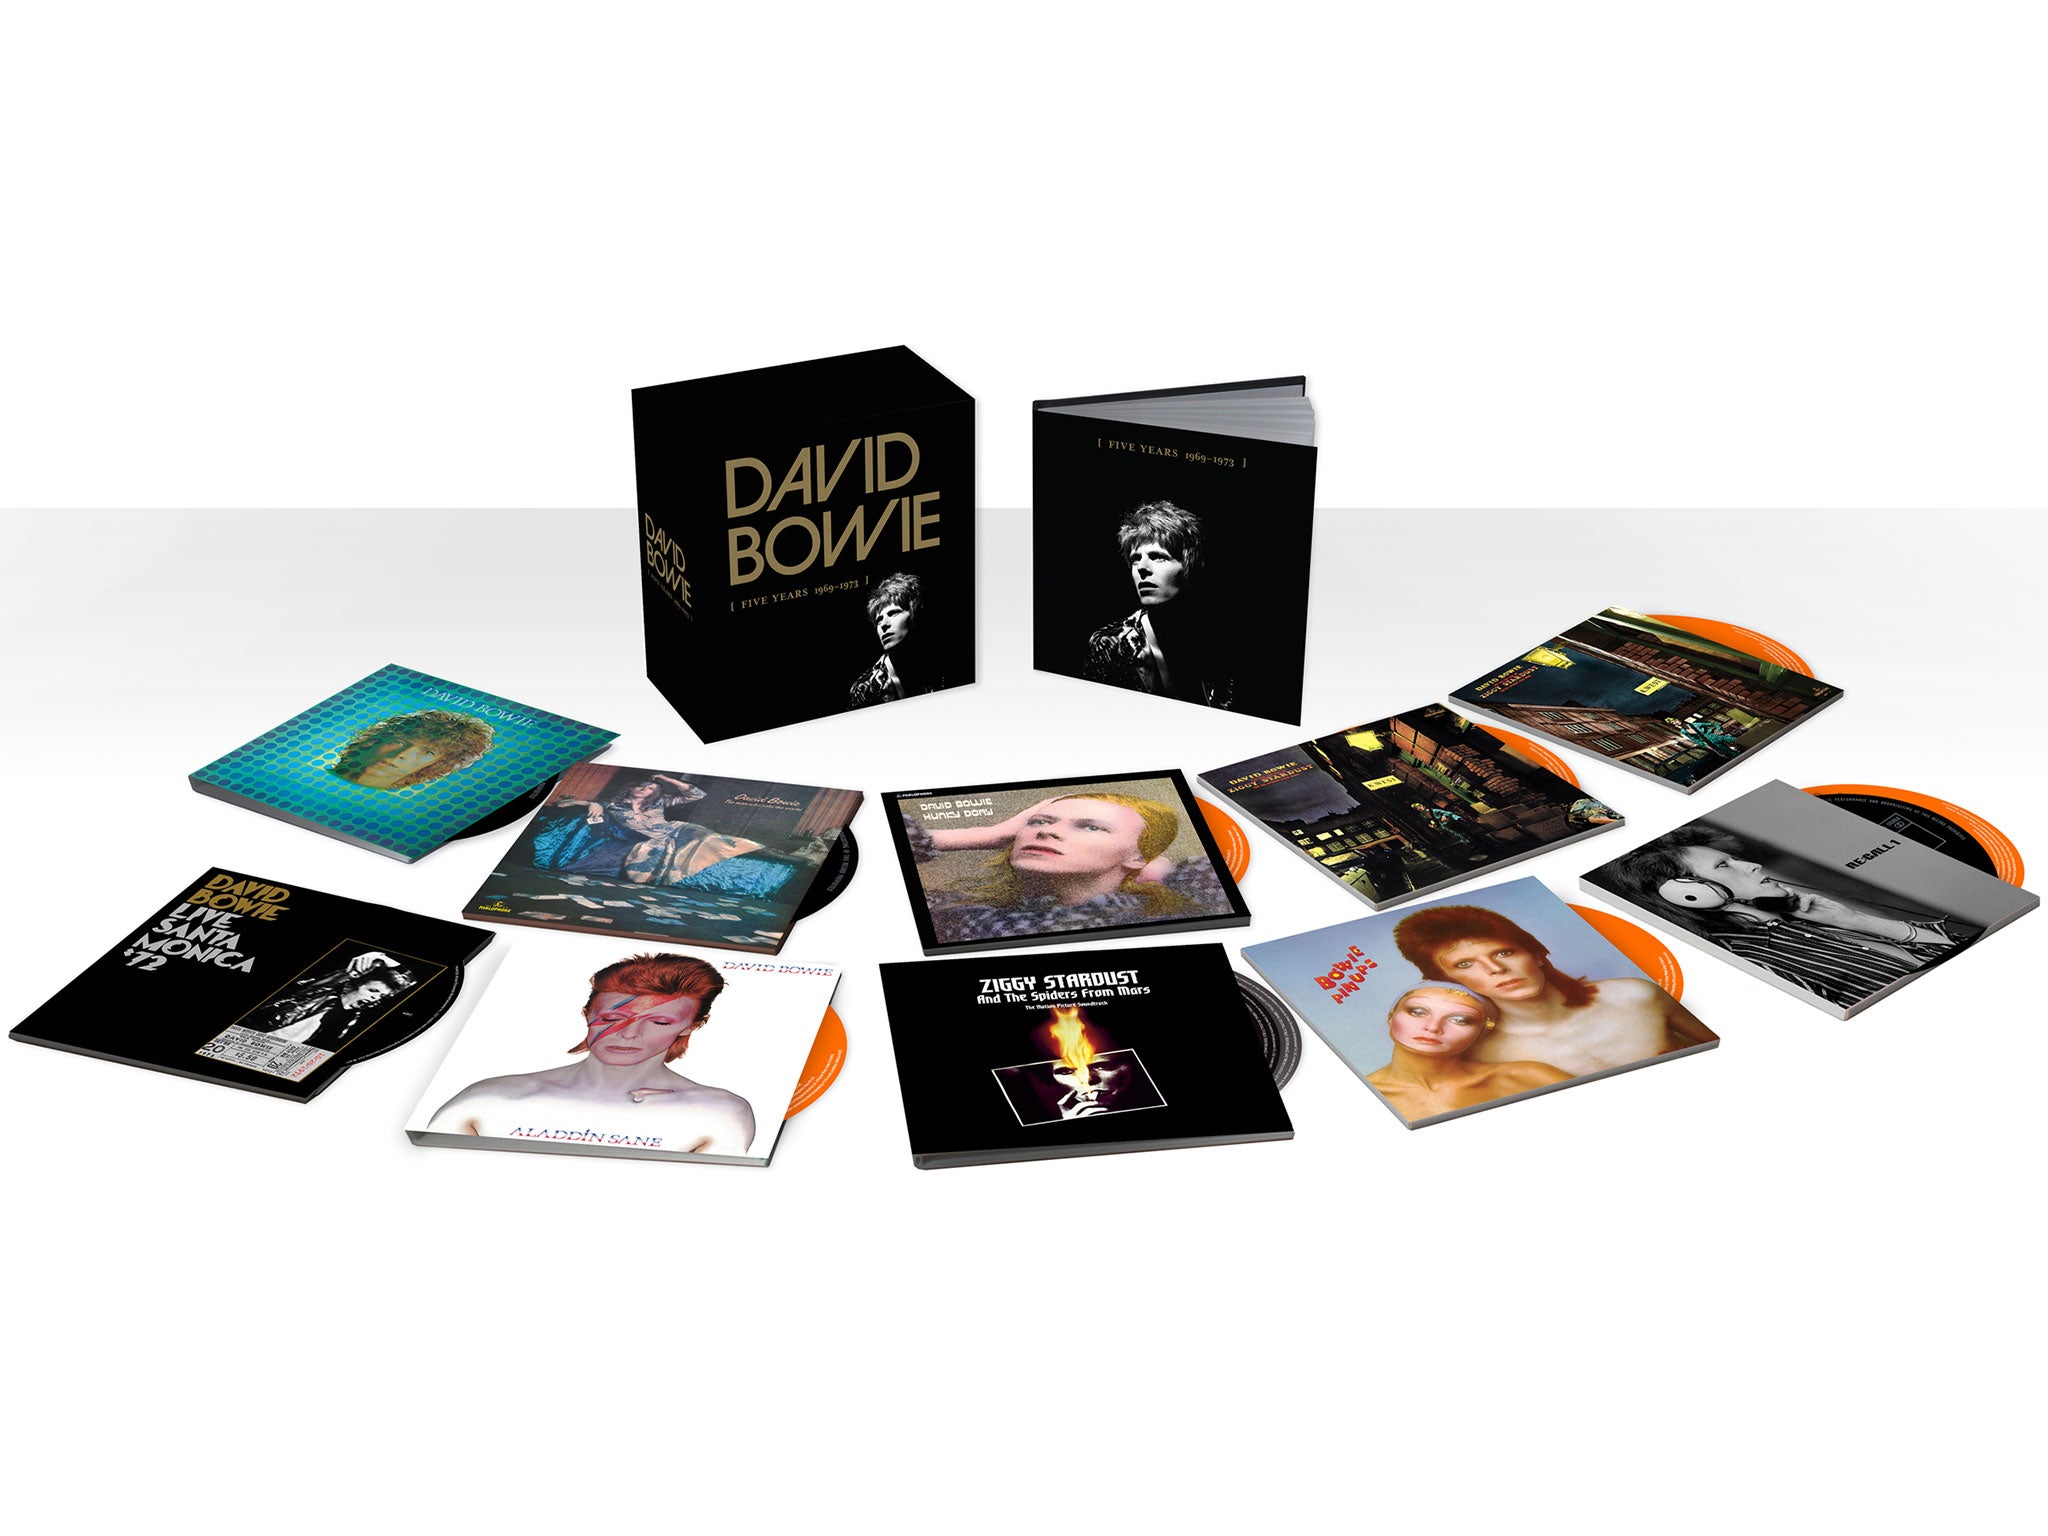 David Bowie's Five Years 1969-1973 comes in CD, vinyl and digital format